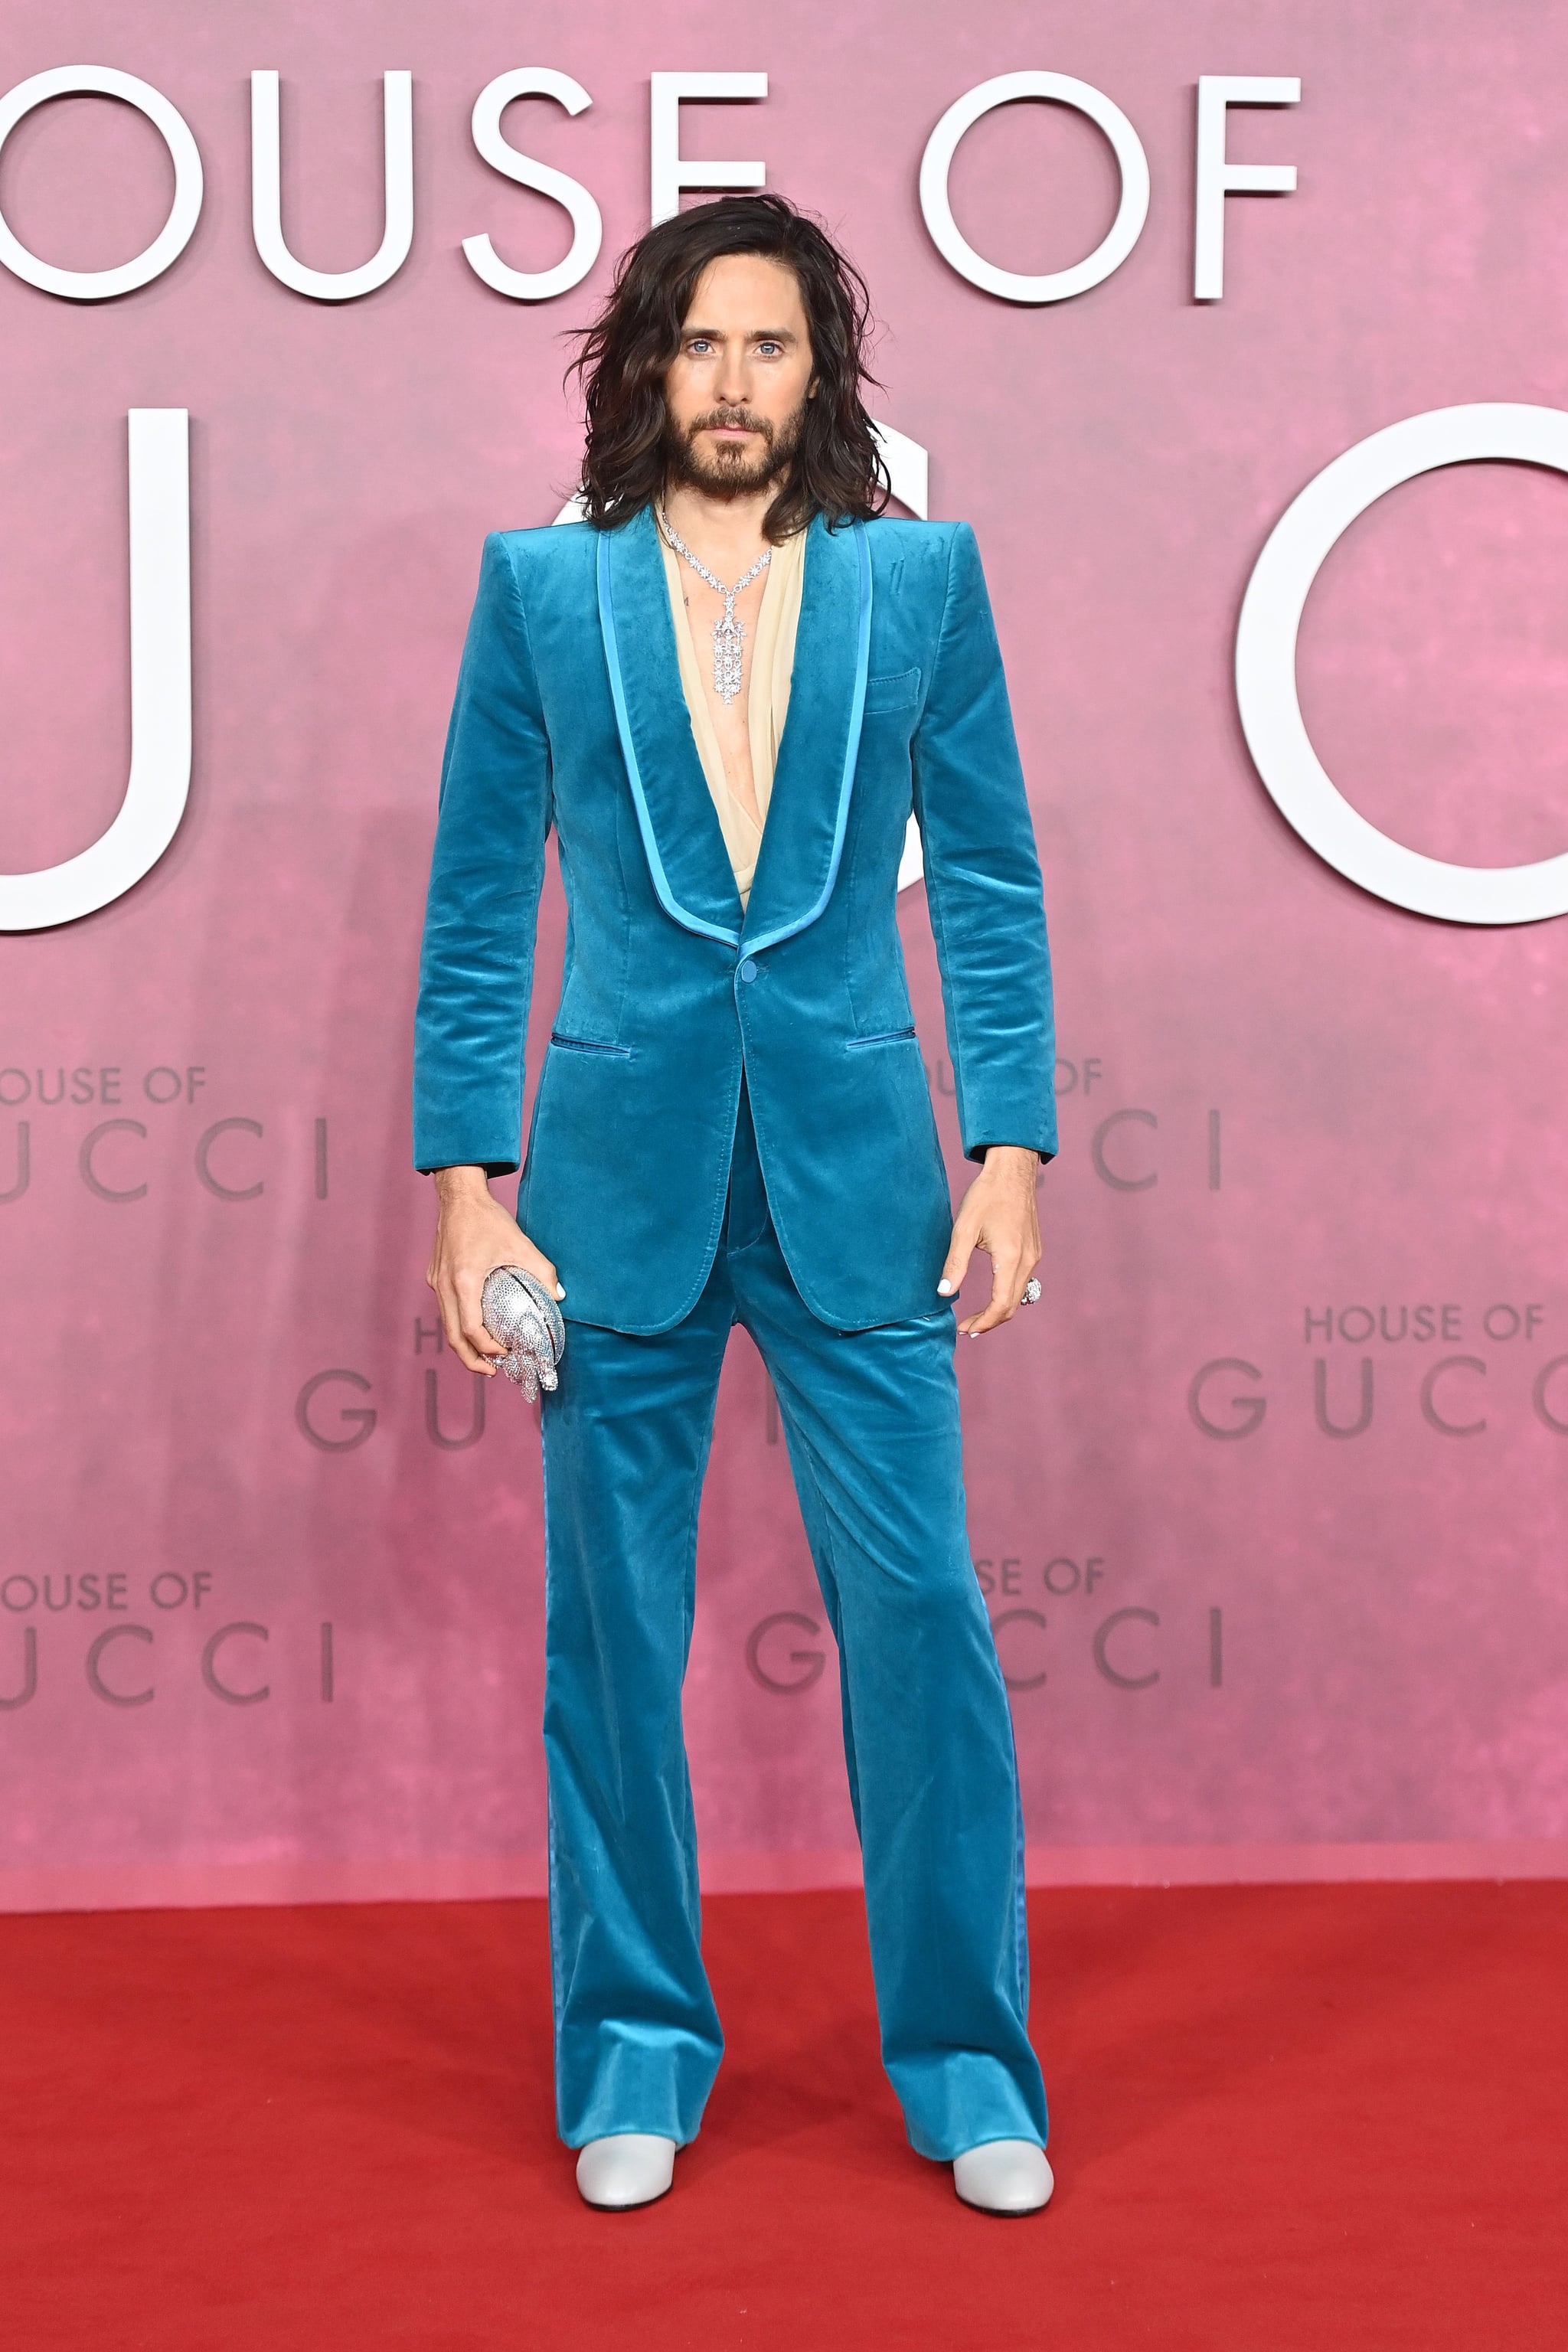 House of Gucci' Costumes, from Lady Gaga's Gowns to Jared Leto's Suits